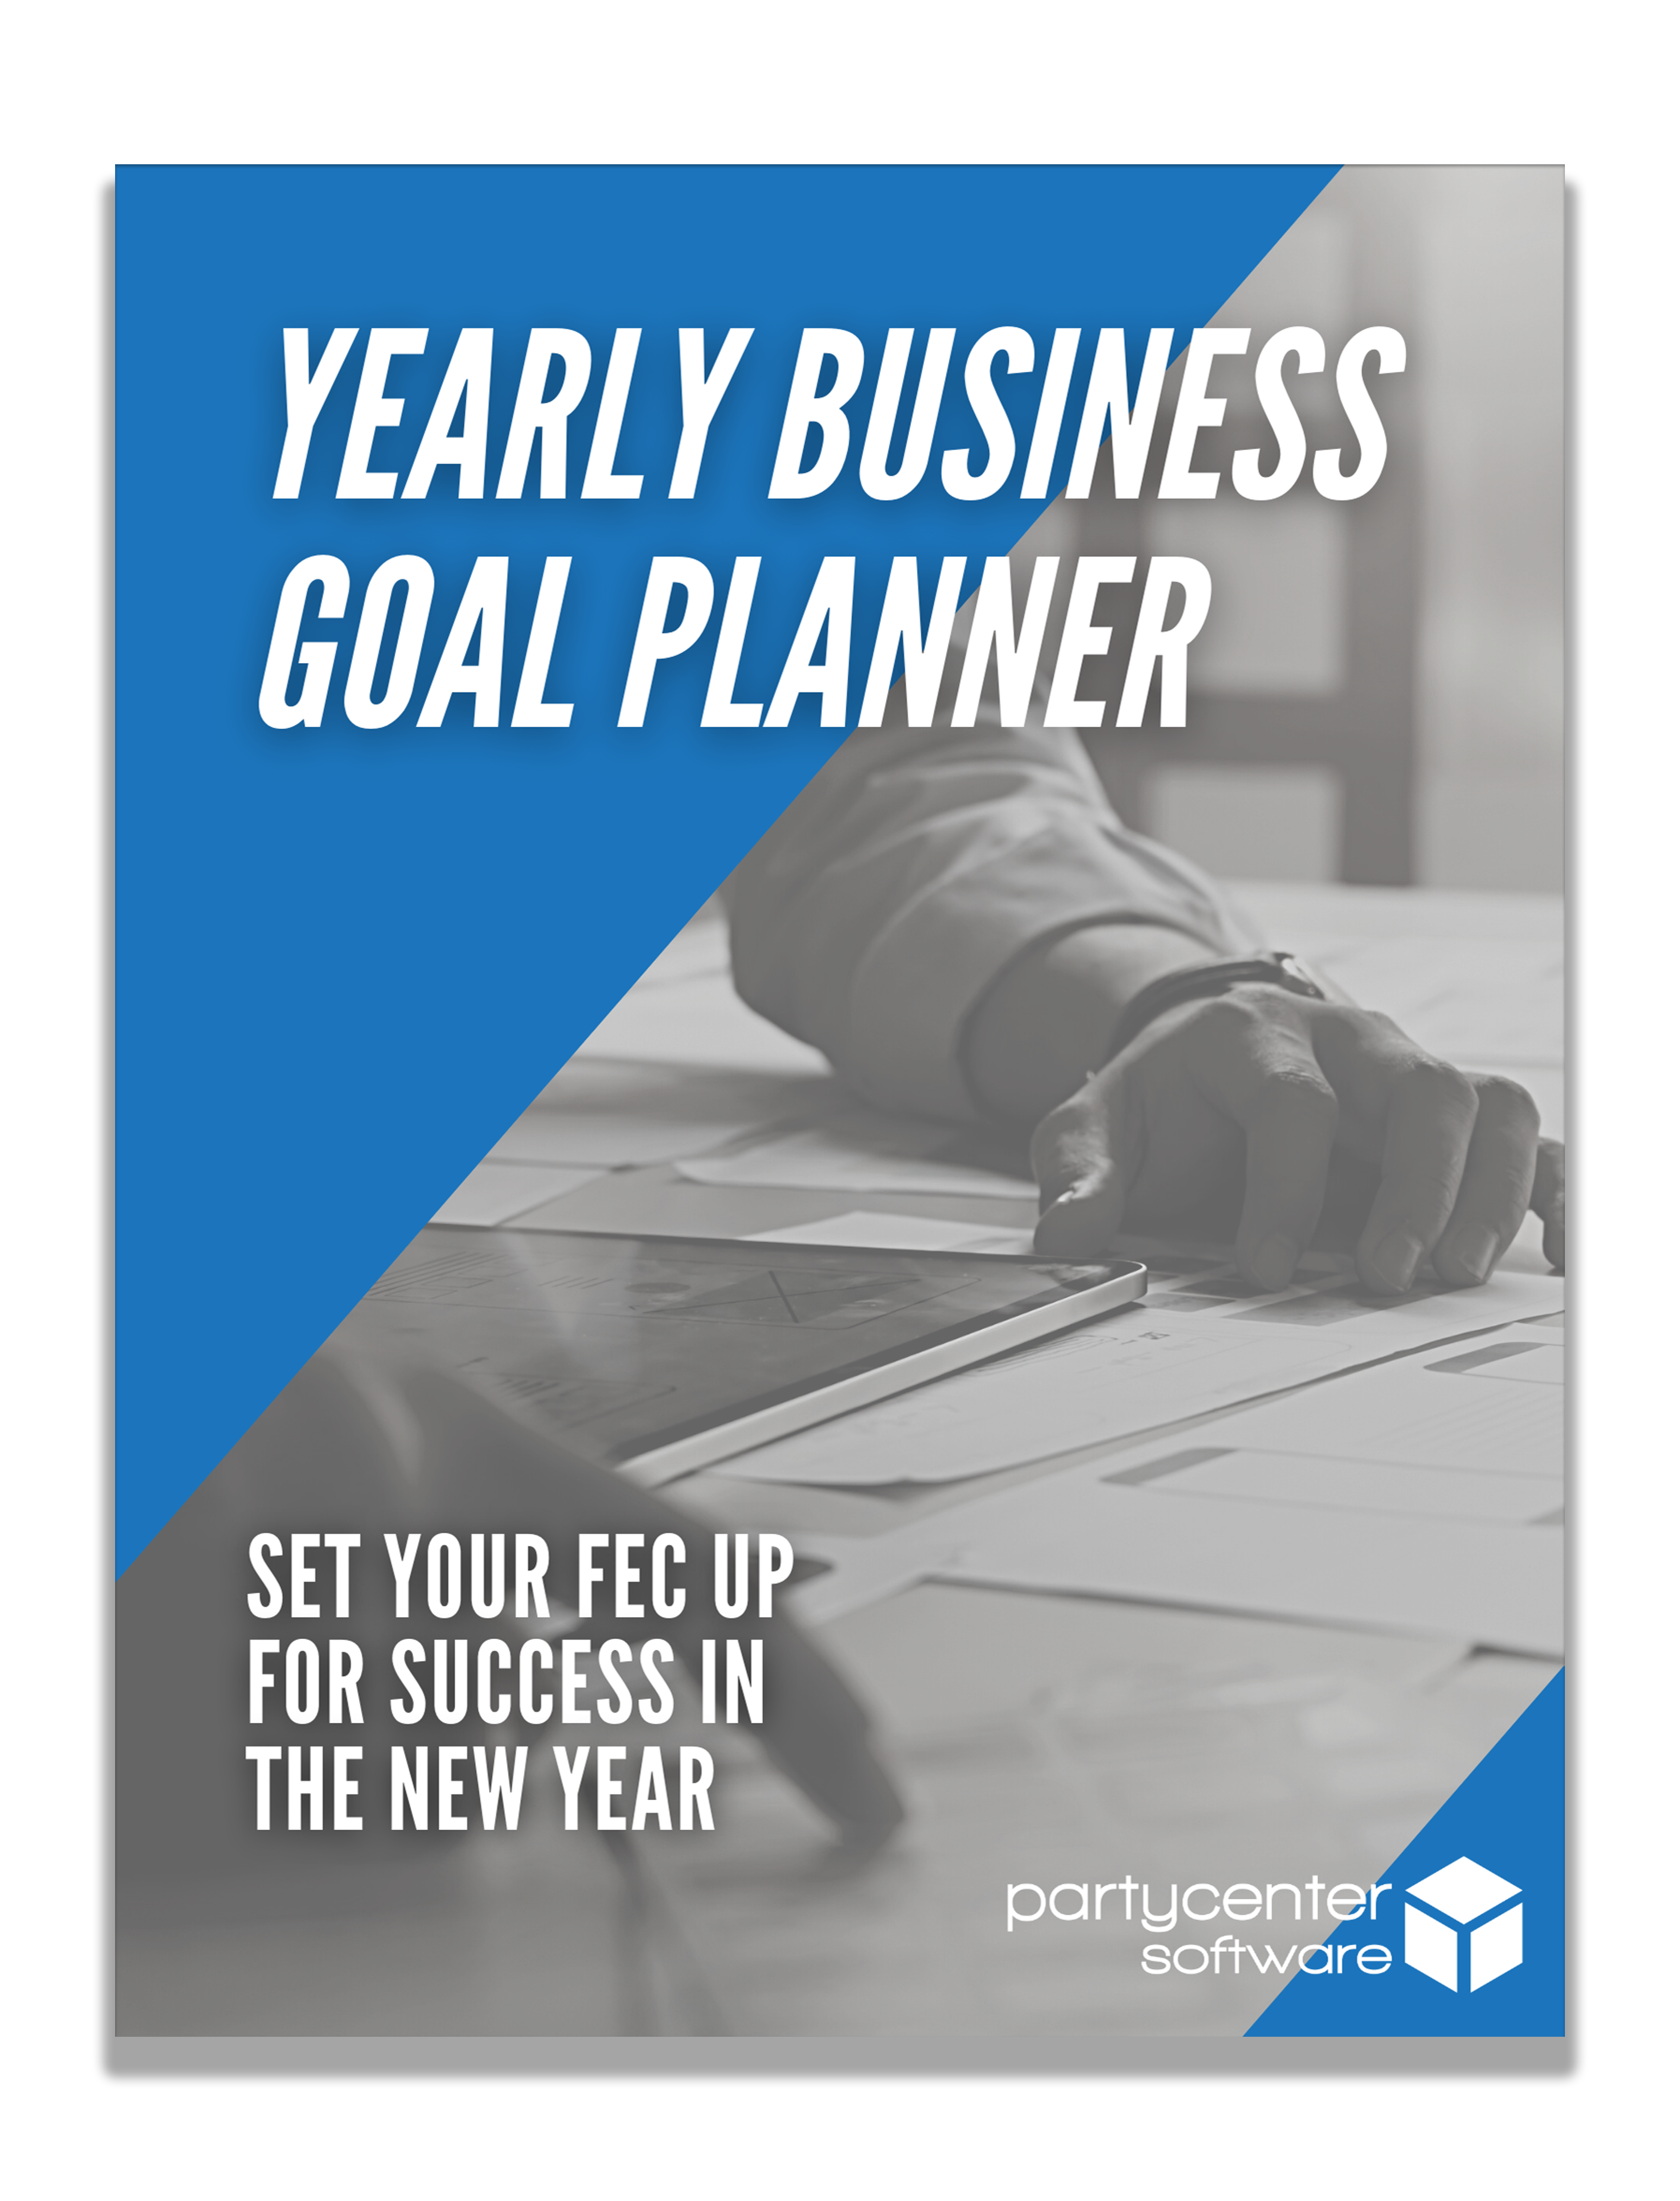 Cover-Yearly-Business-Goal-Planner-shadow copy